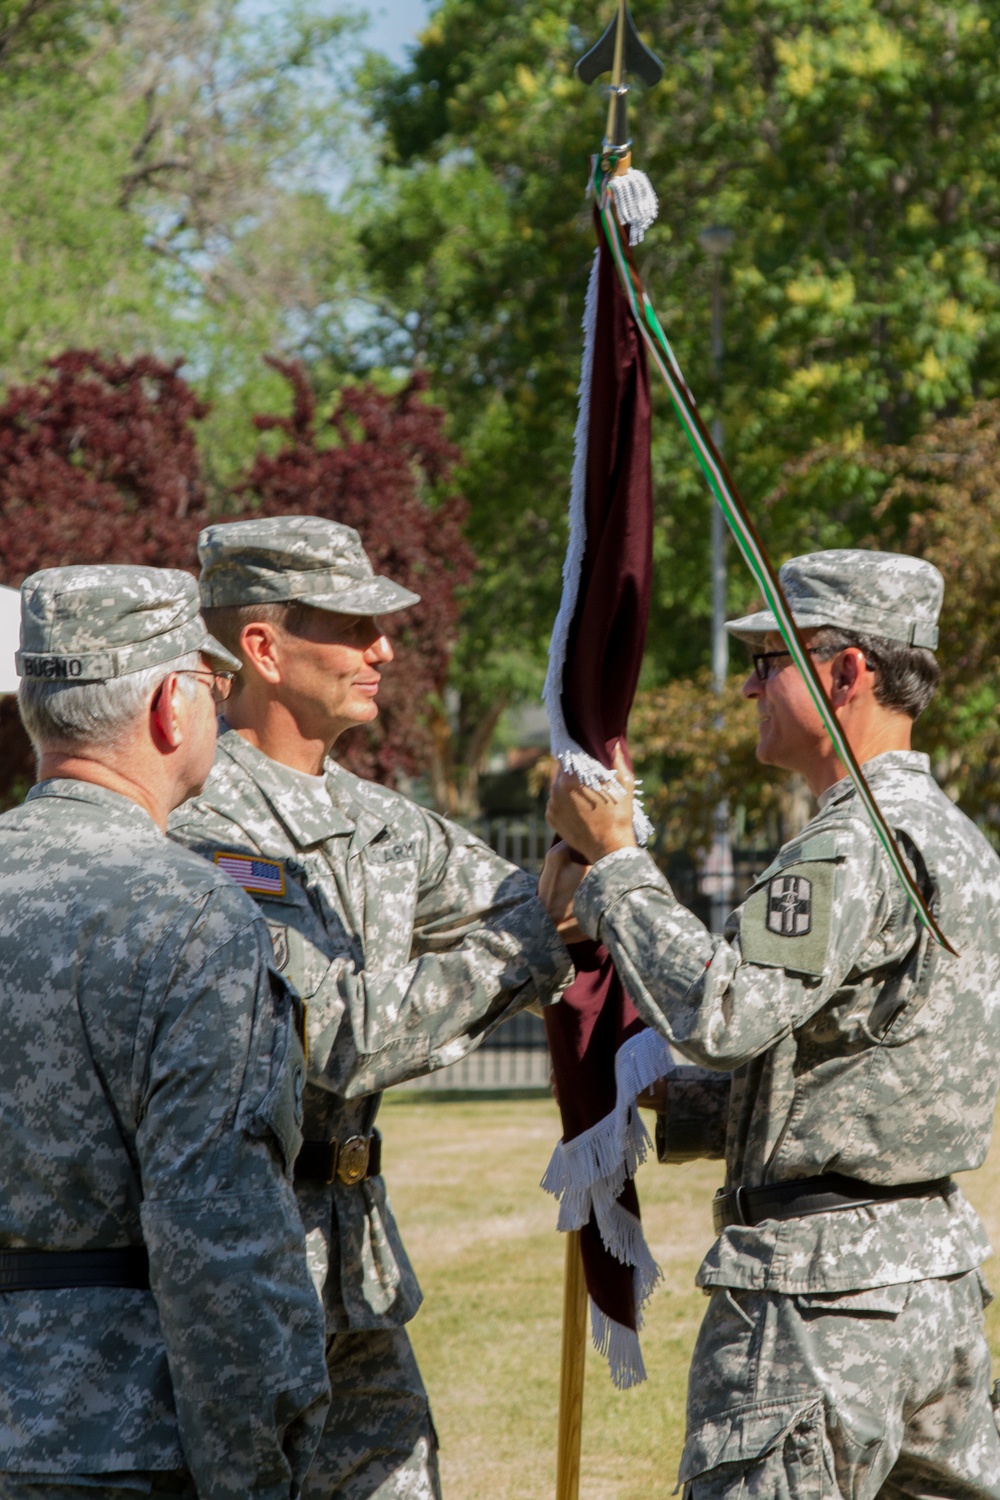 807th MC(DS) welcomes a new commander